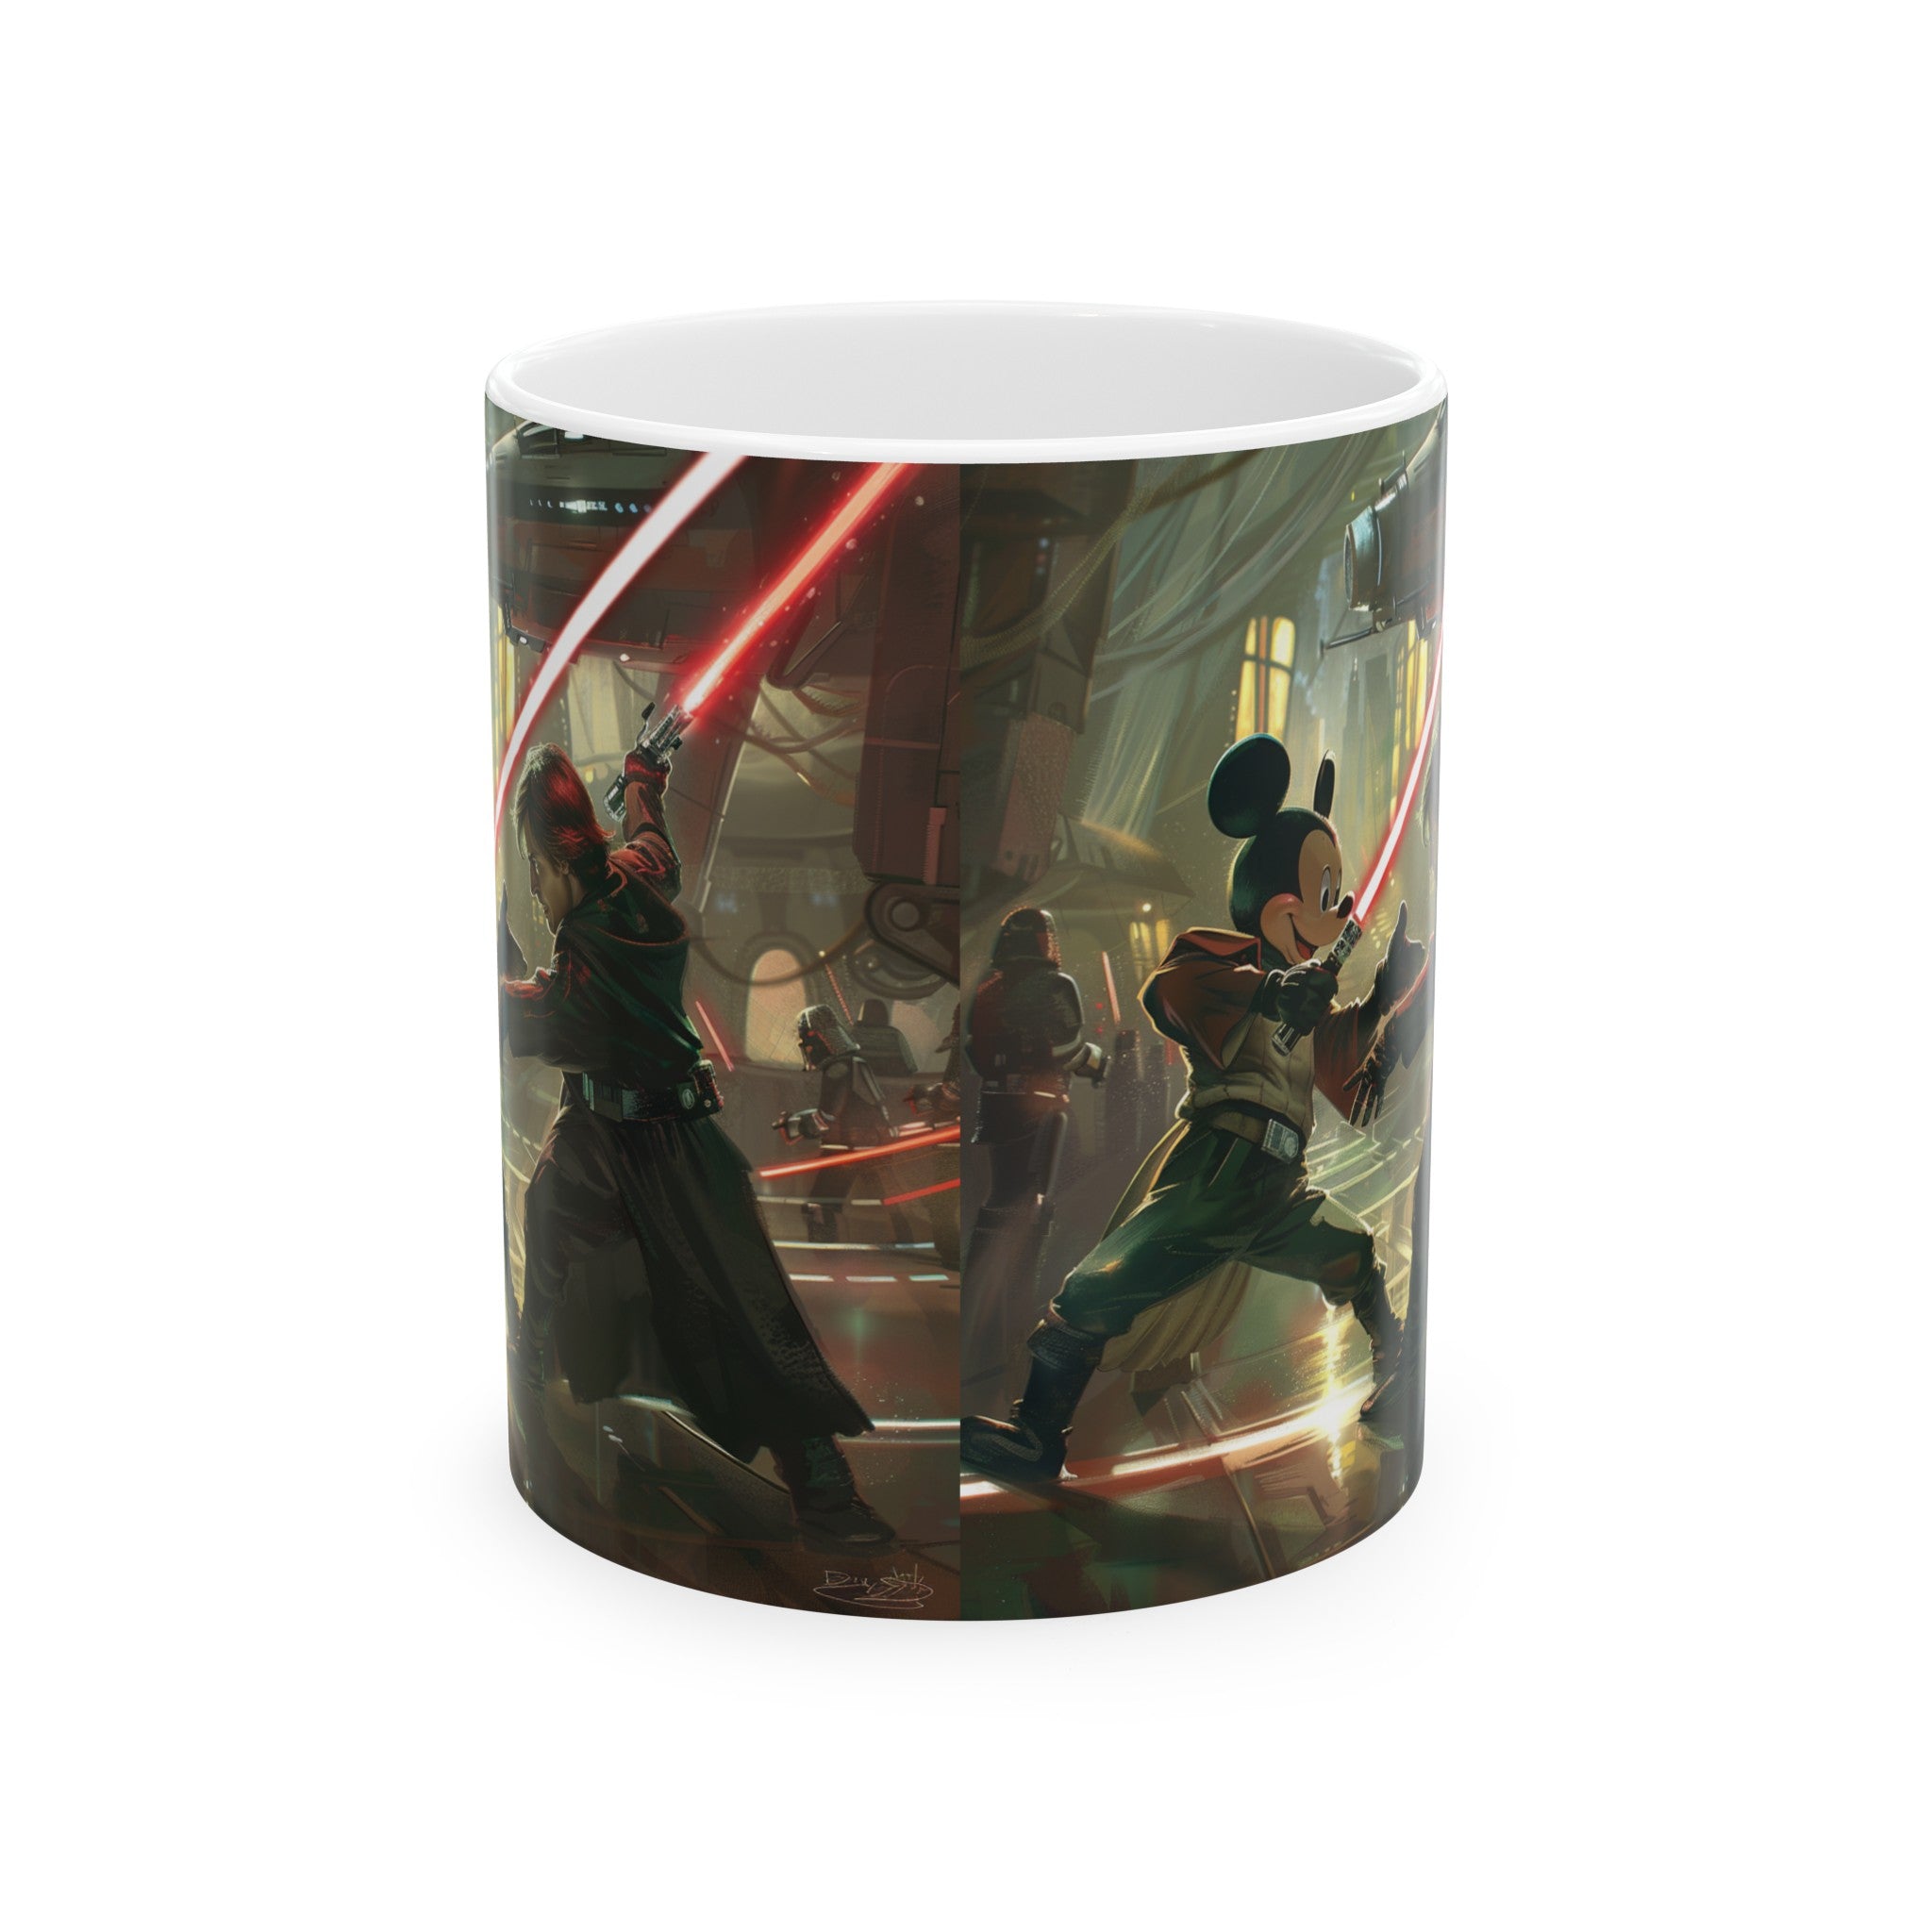 The image showcases a beautifully crafted ceramic mug, available in both 11oz and 15oz sizes. The mug is adorned with a colorful, detailed illustration of a fantasy kingdom in battle, featuring knights, dragons, and castles under siege, designed to captivate and inspire with every use.